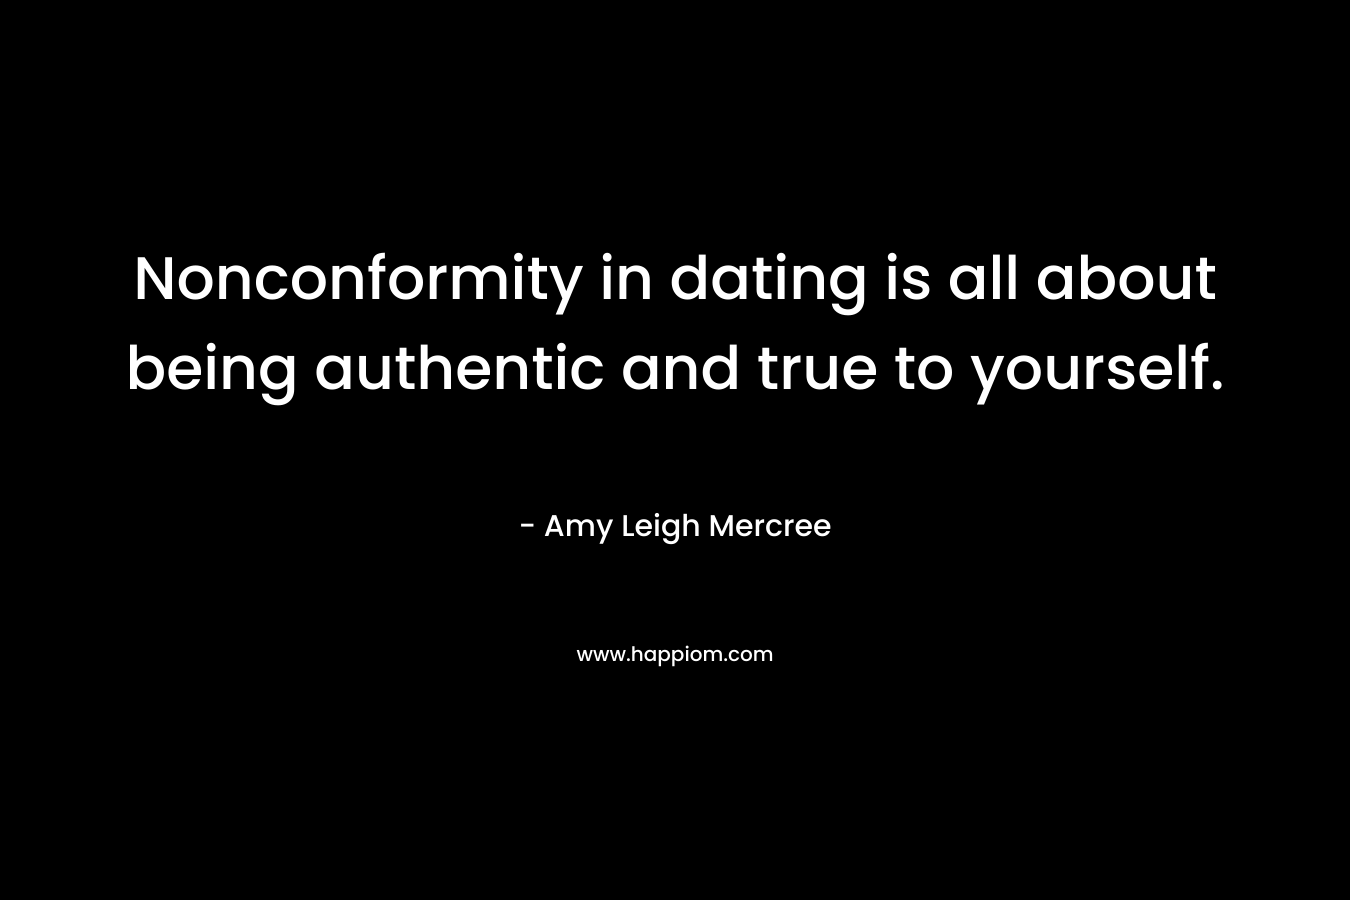 Nonconformity in dating is all about being authentic and true to yourself. – Amy Leigh Mercree